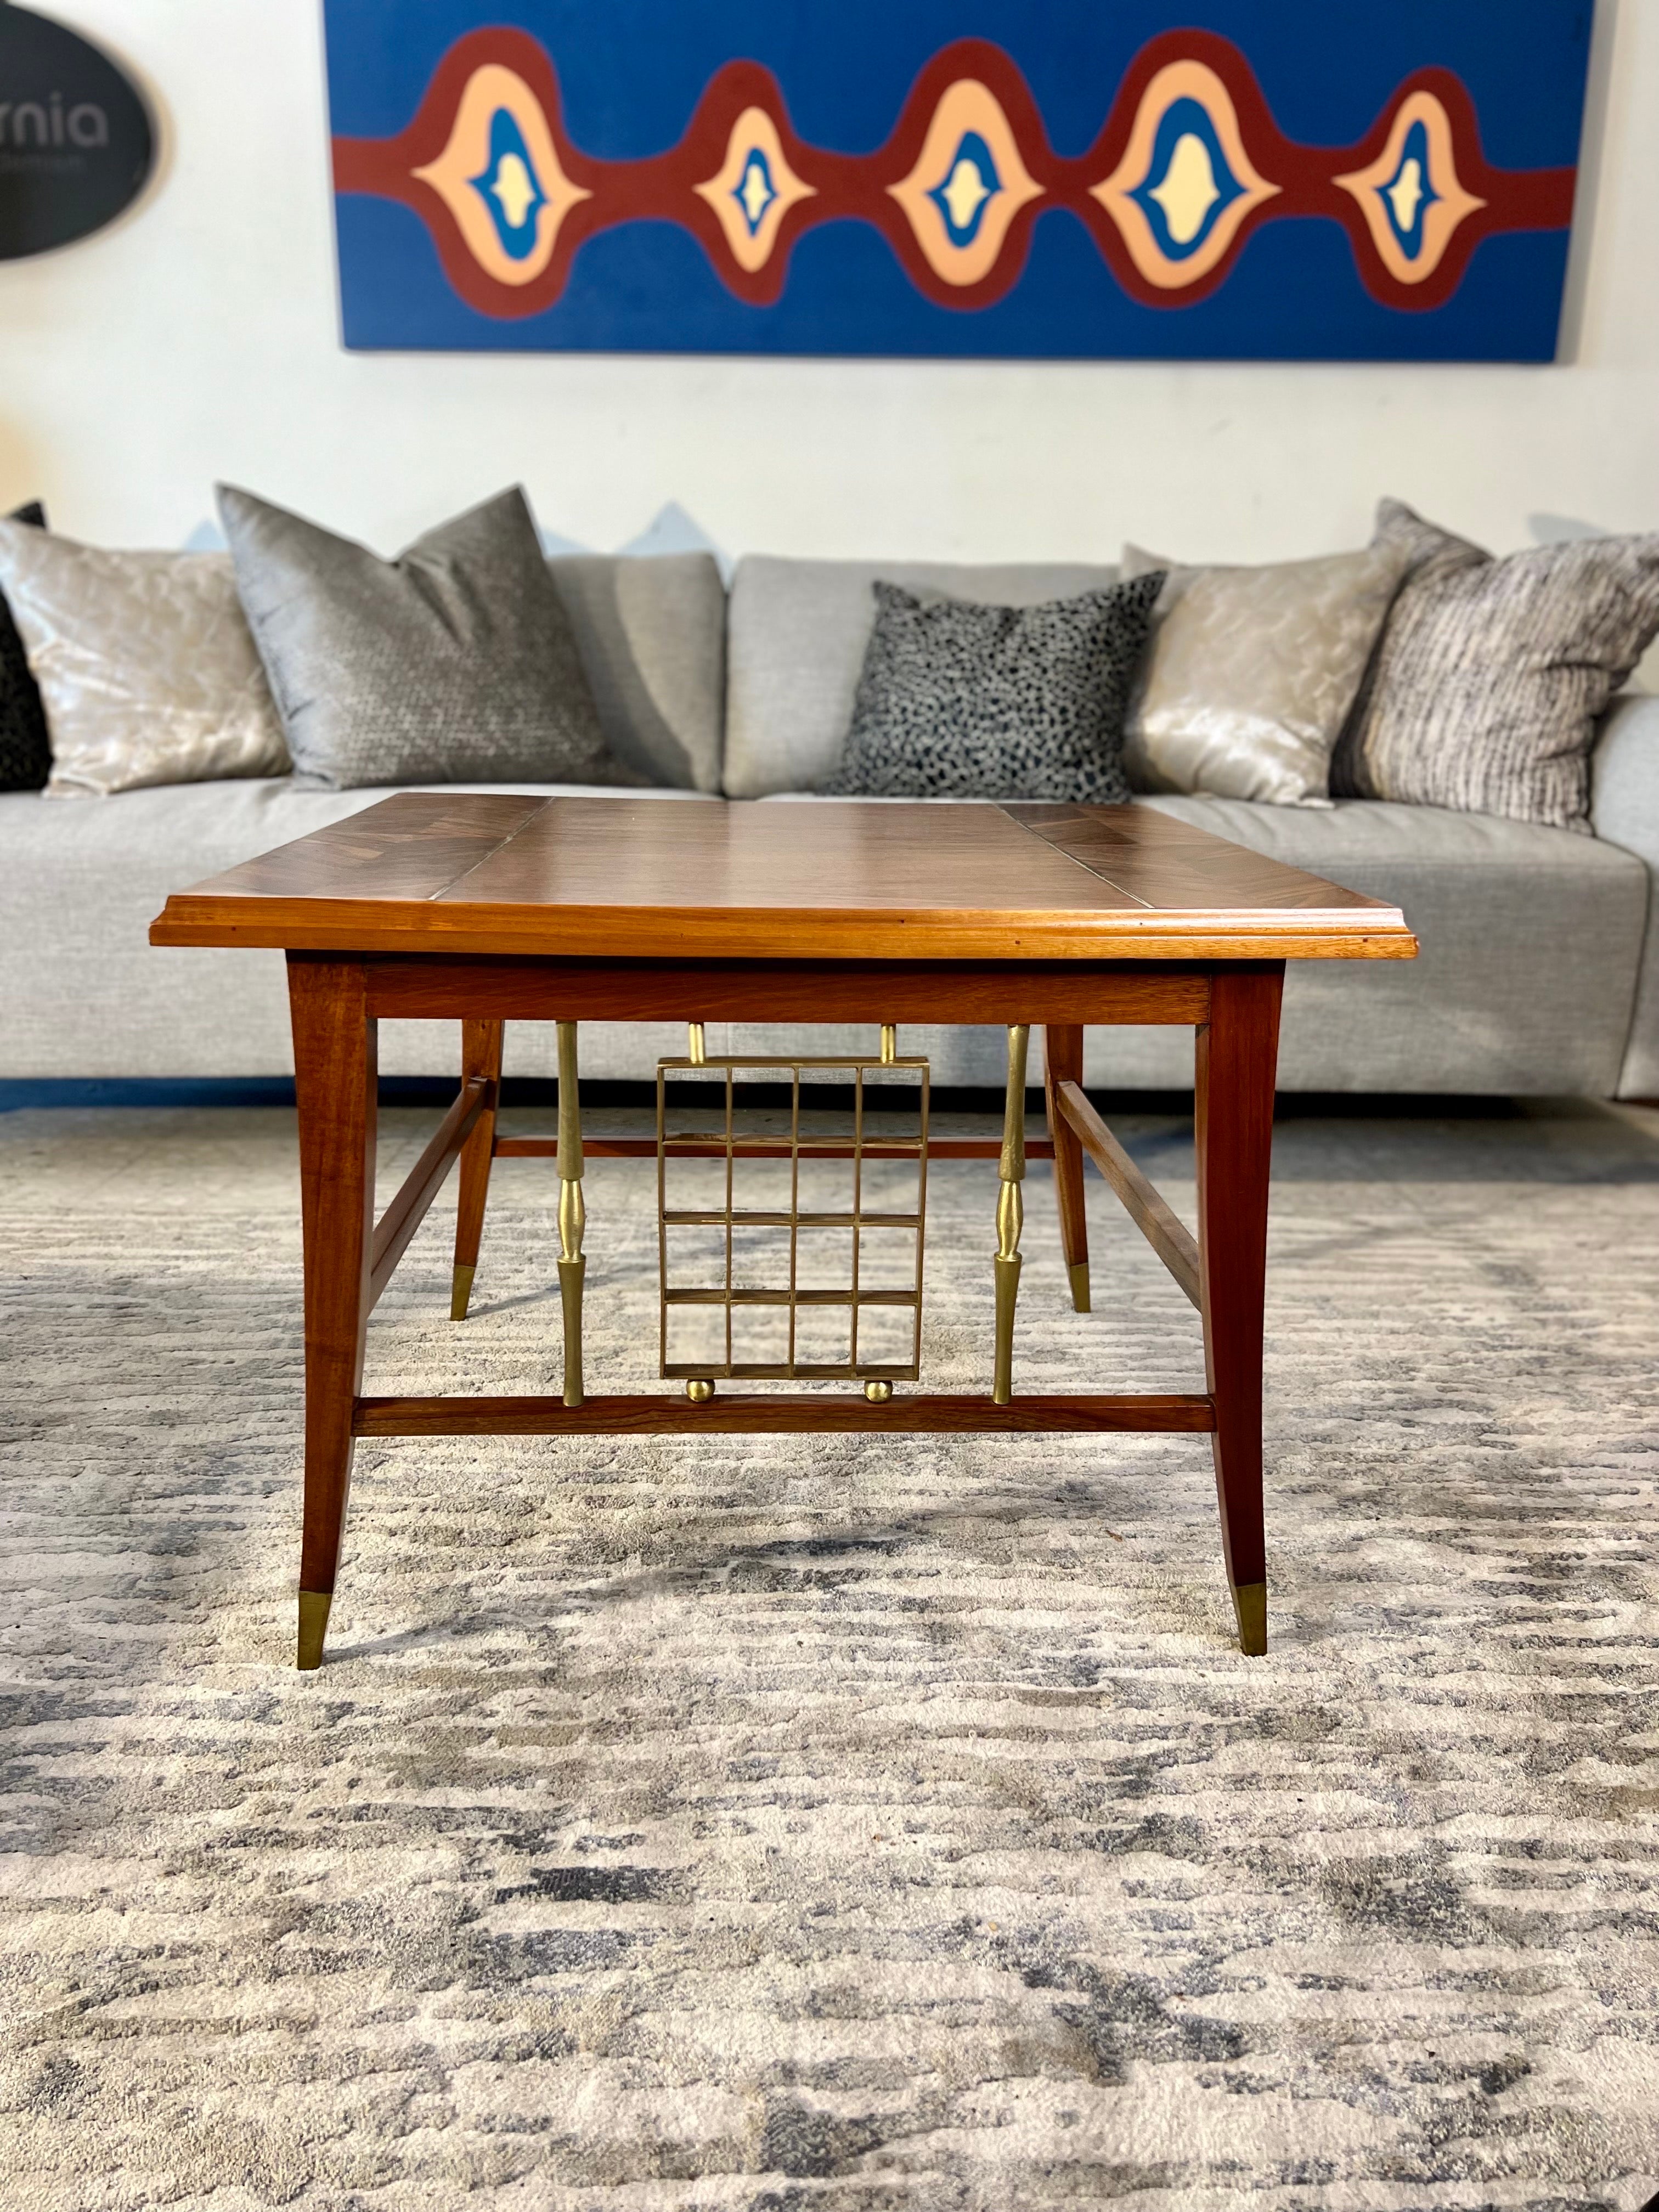 Classic mid-century modern end table, professionally restored by our master craftsmen in our workshop, it has minimal details that time marked but that give that character and essence to our vintage pieces.
We can gladly send more photos or video